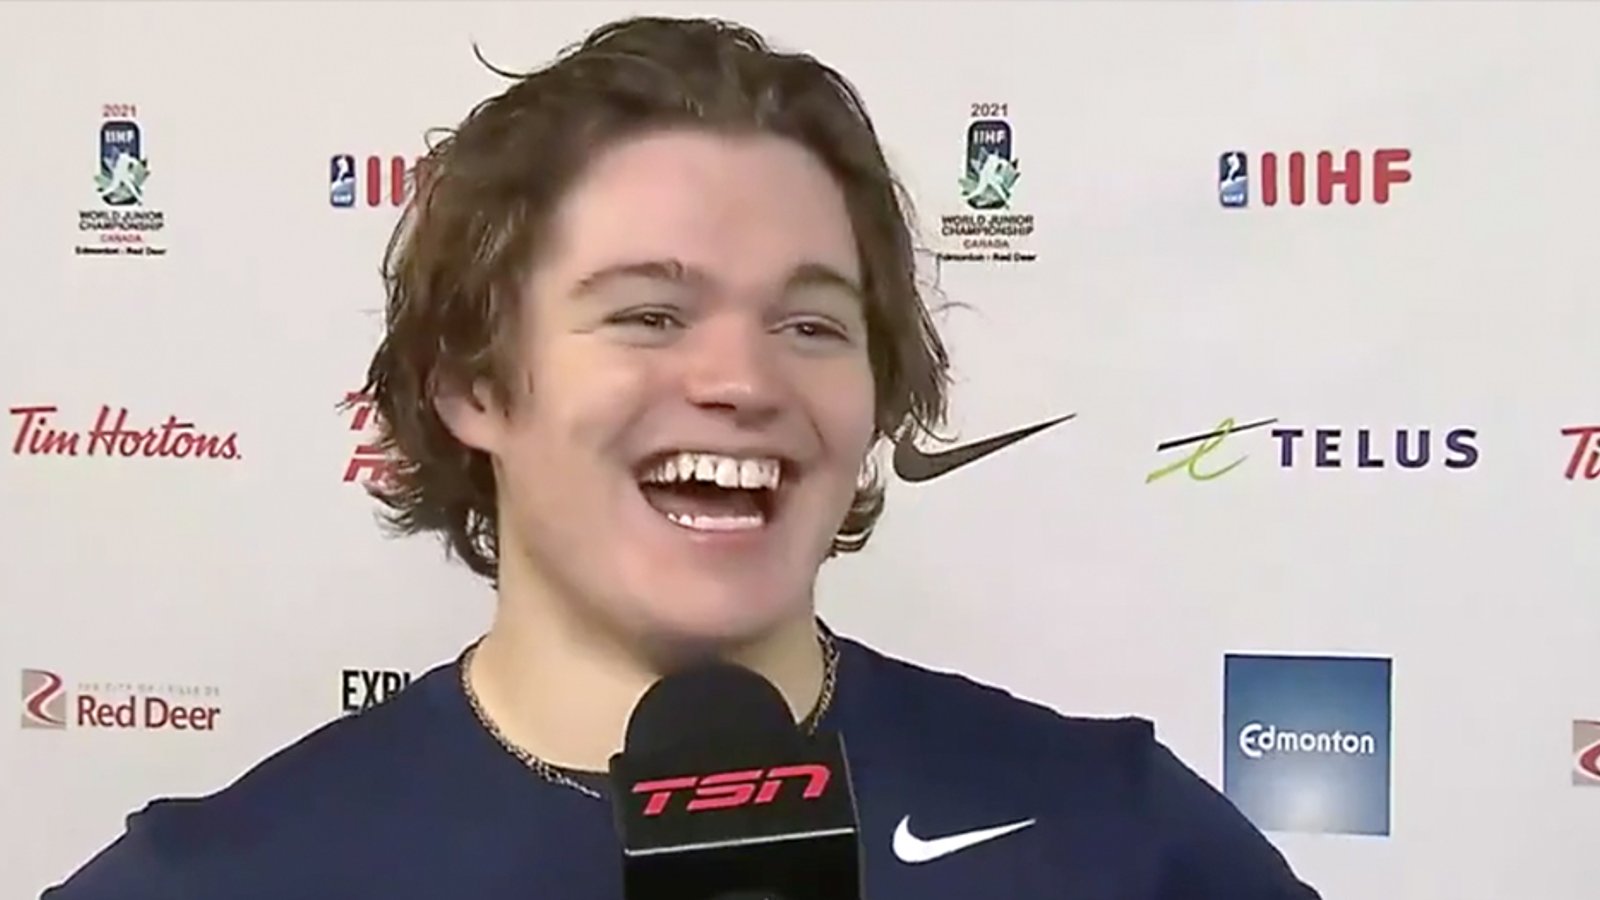 Cole Caufield swears on live TV then can't help from bursting out into laughter